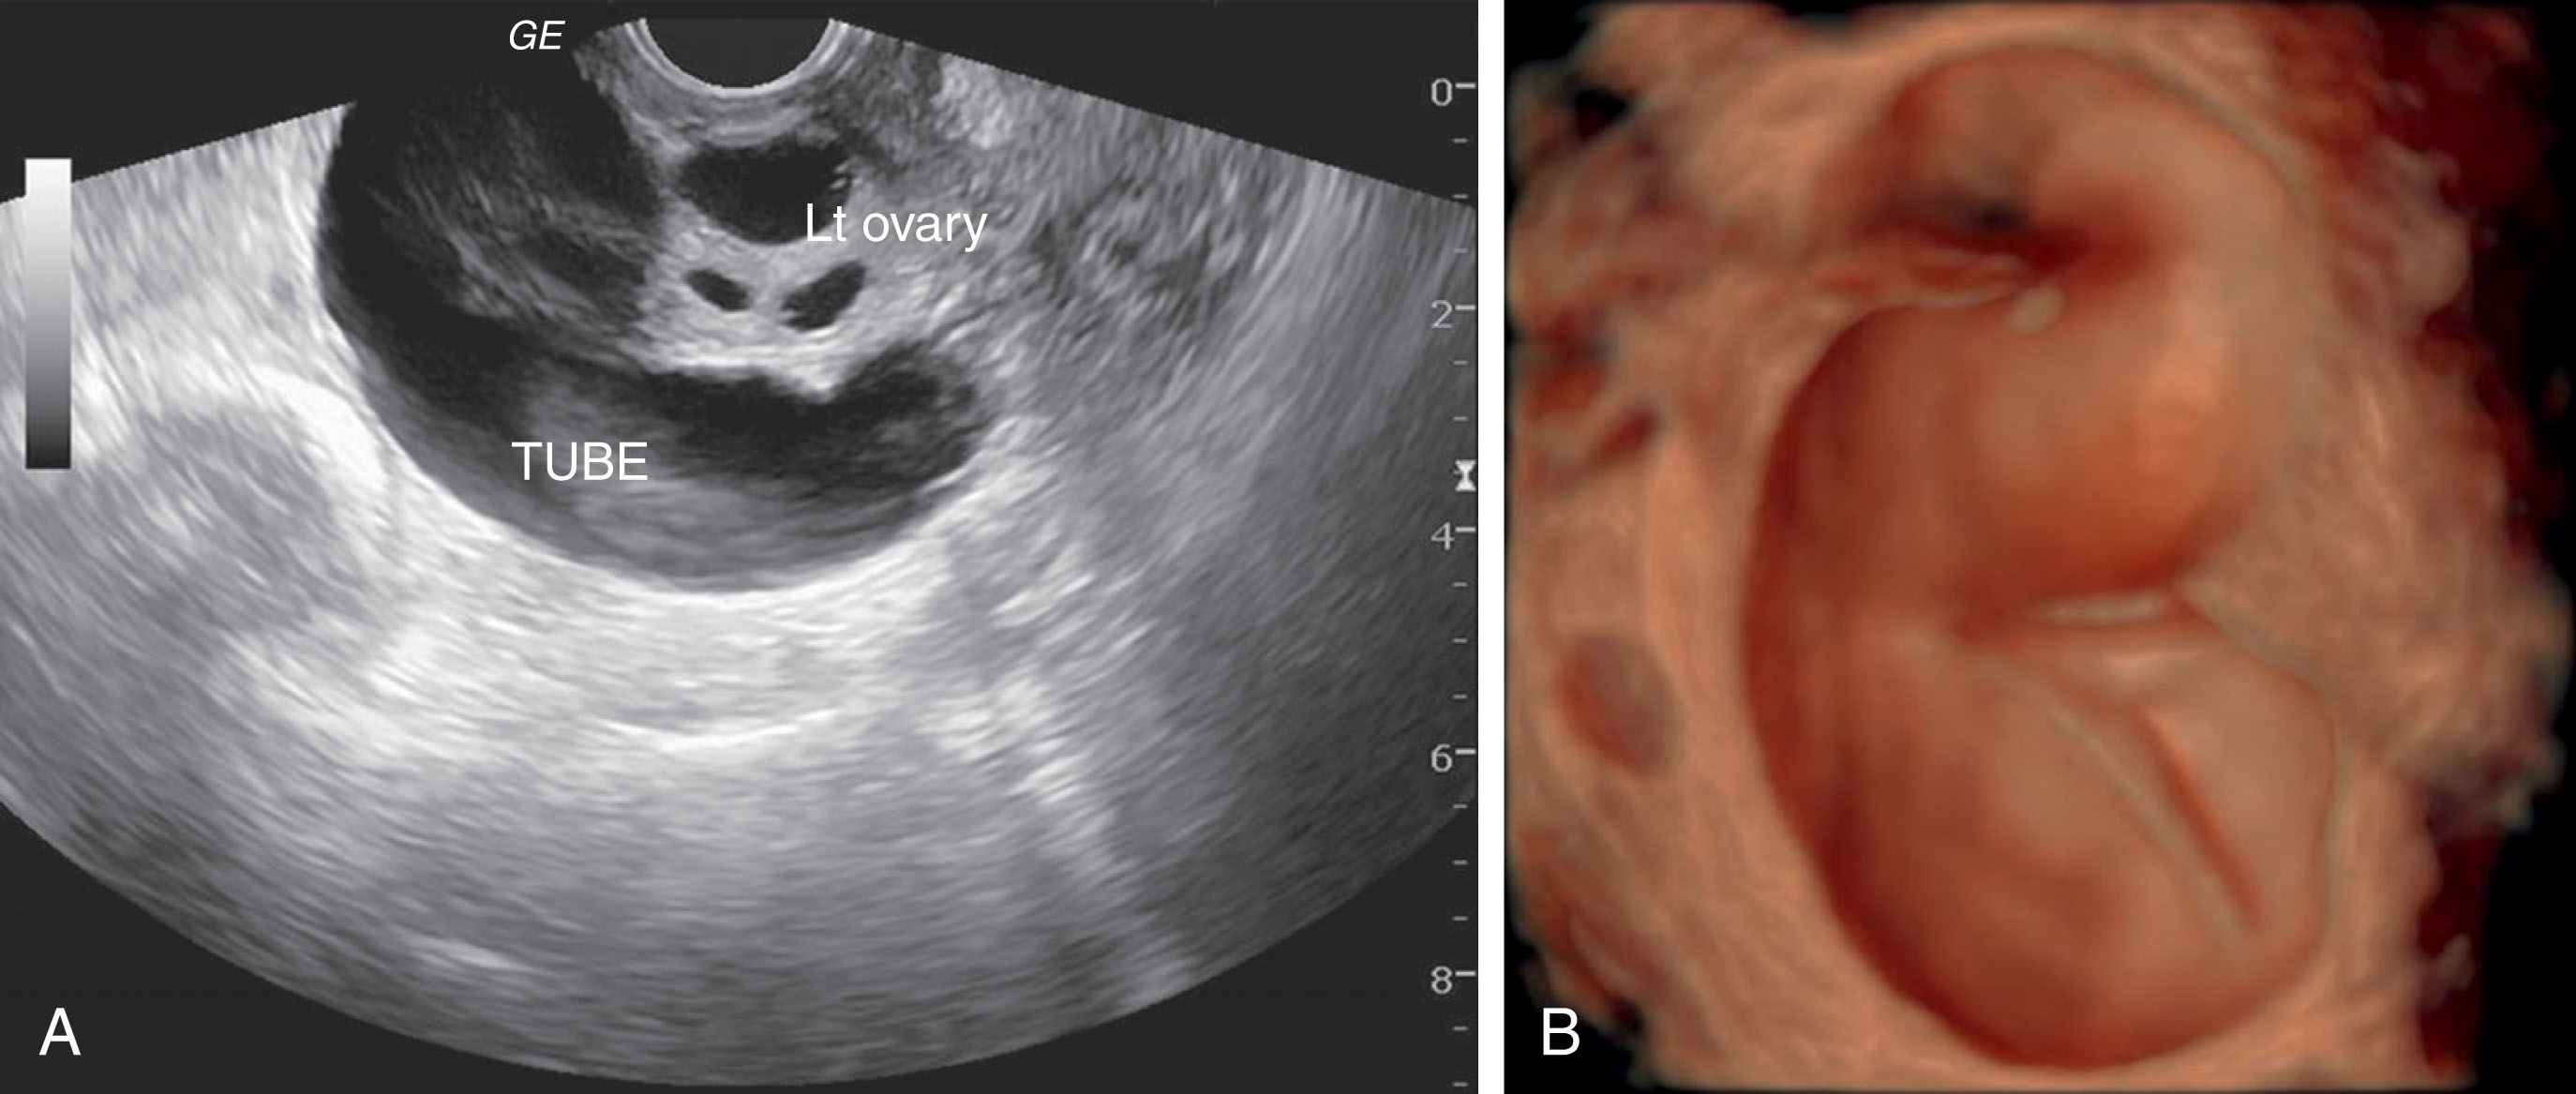 Fig. 45.3, (A) Hydrosalpinx. Patient presented with abdominal pain, status post-hysterectomy, and right oophorectomy 5 years prior. A serpiginous, mostly anechoic structure abuts the left ovary. Fluid accumulates from tubal secretions. (B) Three-dimensional rendering of the hydrosalpinx demonstrates the dilation and curvature of the tube.